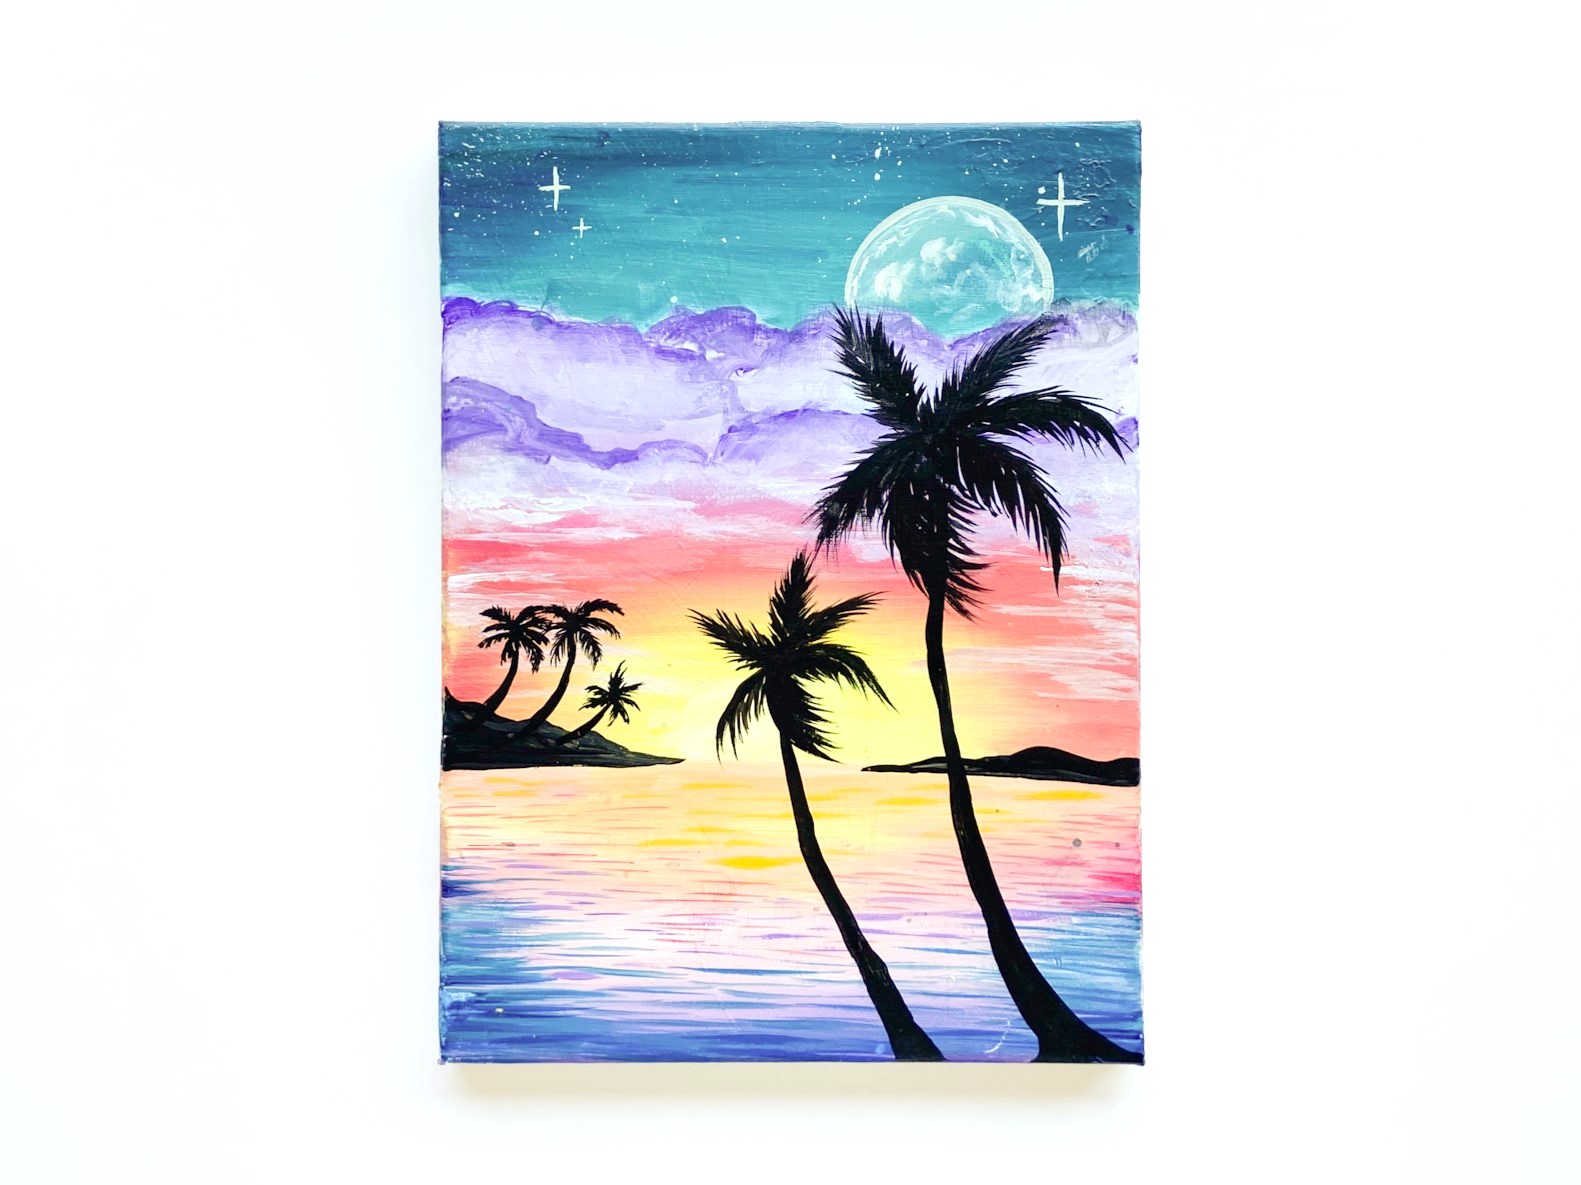 In-Studio Paint Night - Tropical Breeze Acrylic Painting